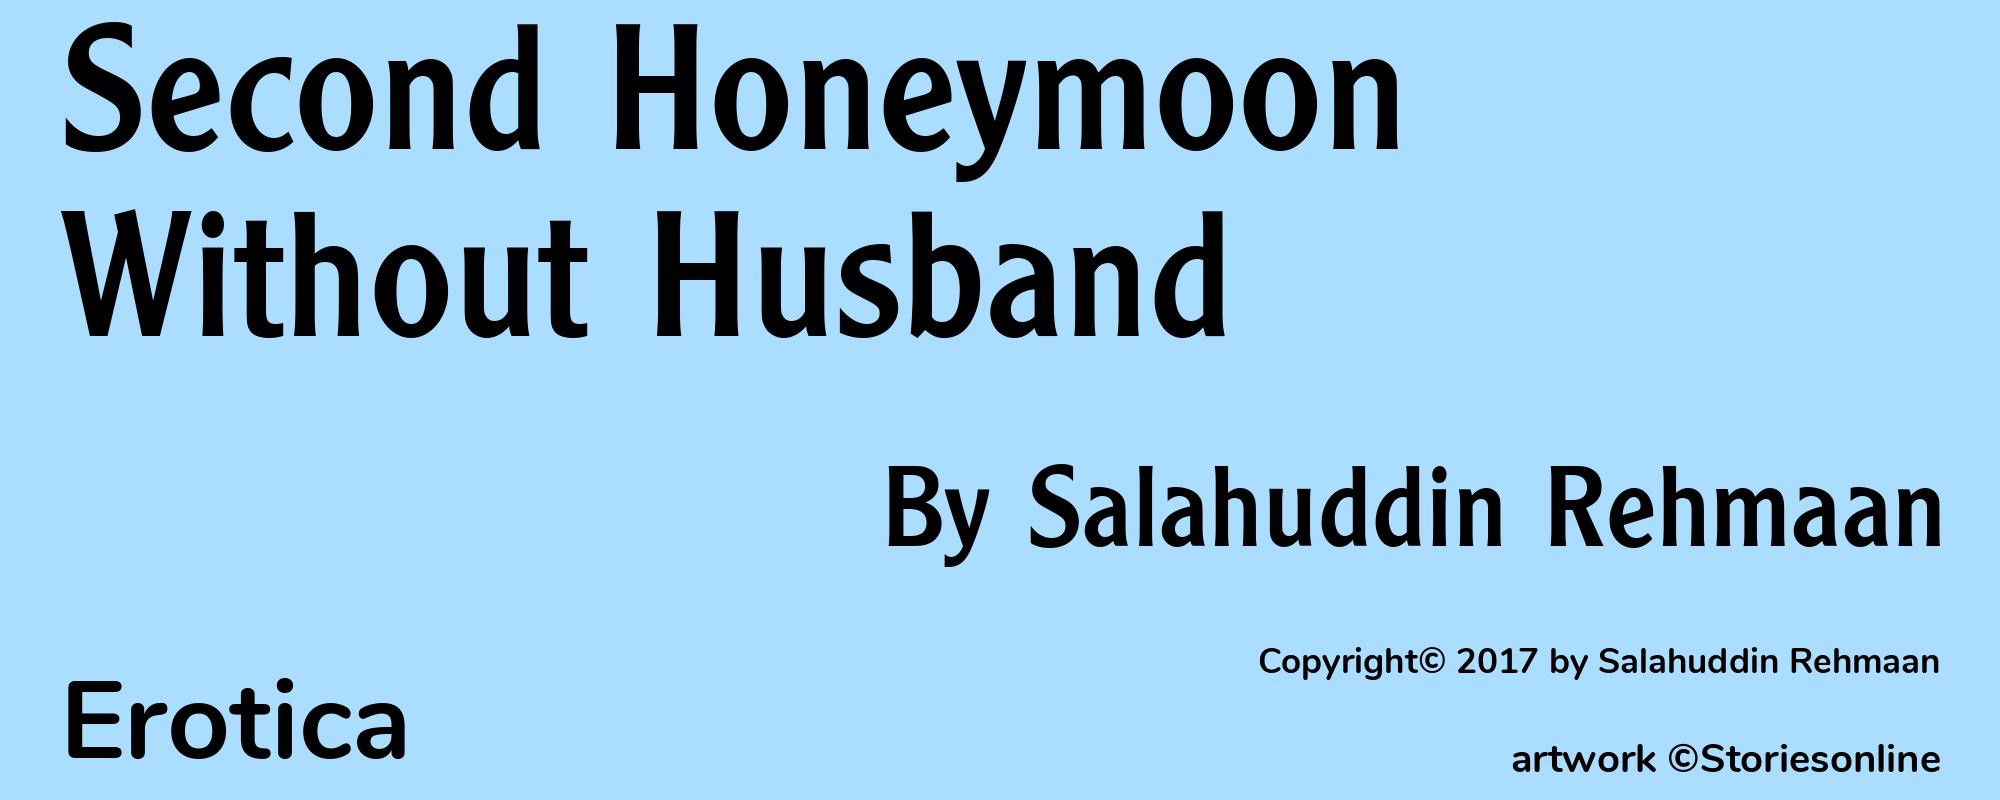 Second Honeymoon Without Husband - Cover